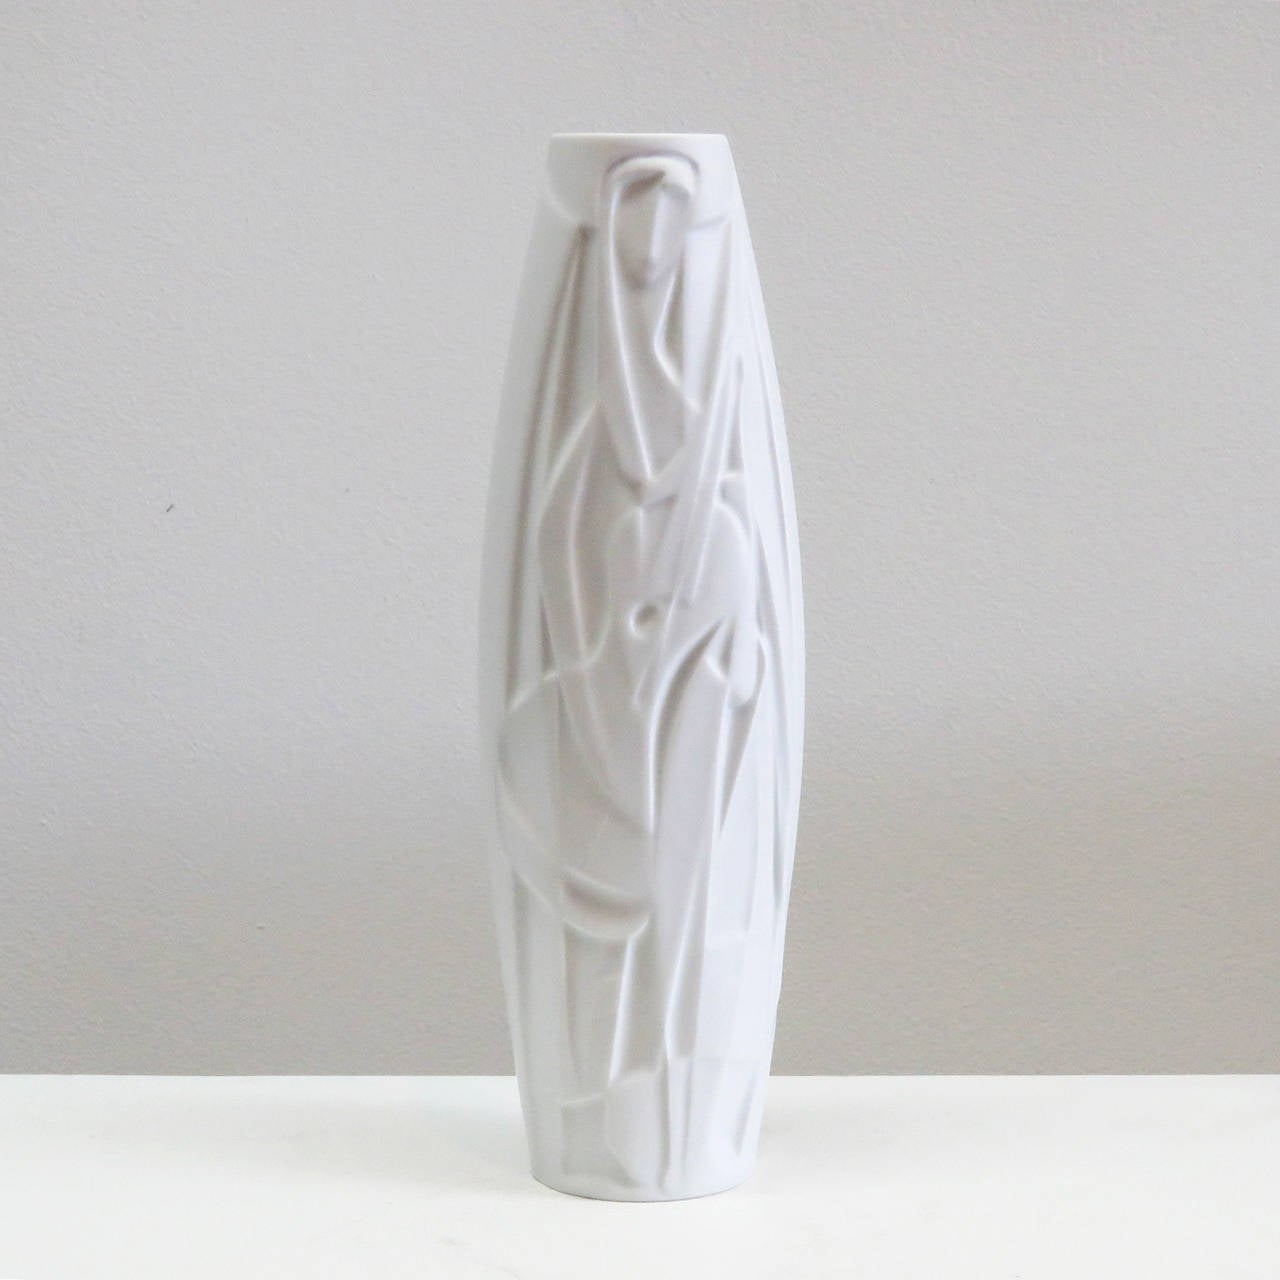 Stunning bisque porcelain Op Art vase with abstract relief of a female musician, designed by Cuno Fischer for Rosenthal Studioline, marked.